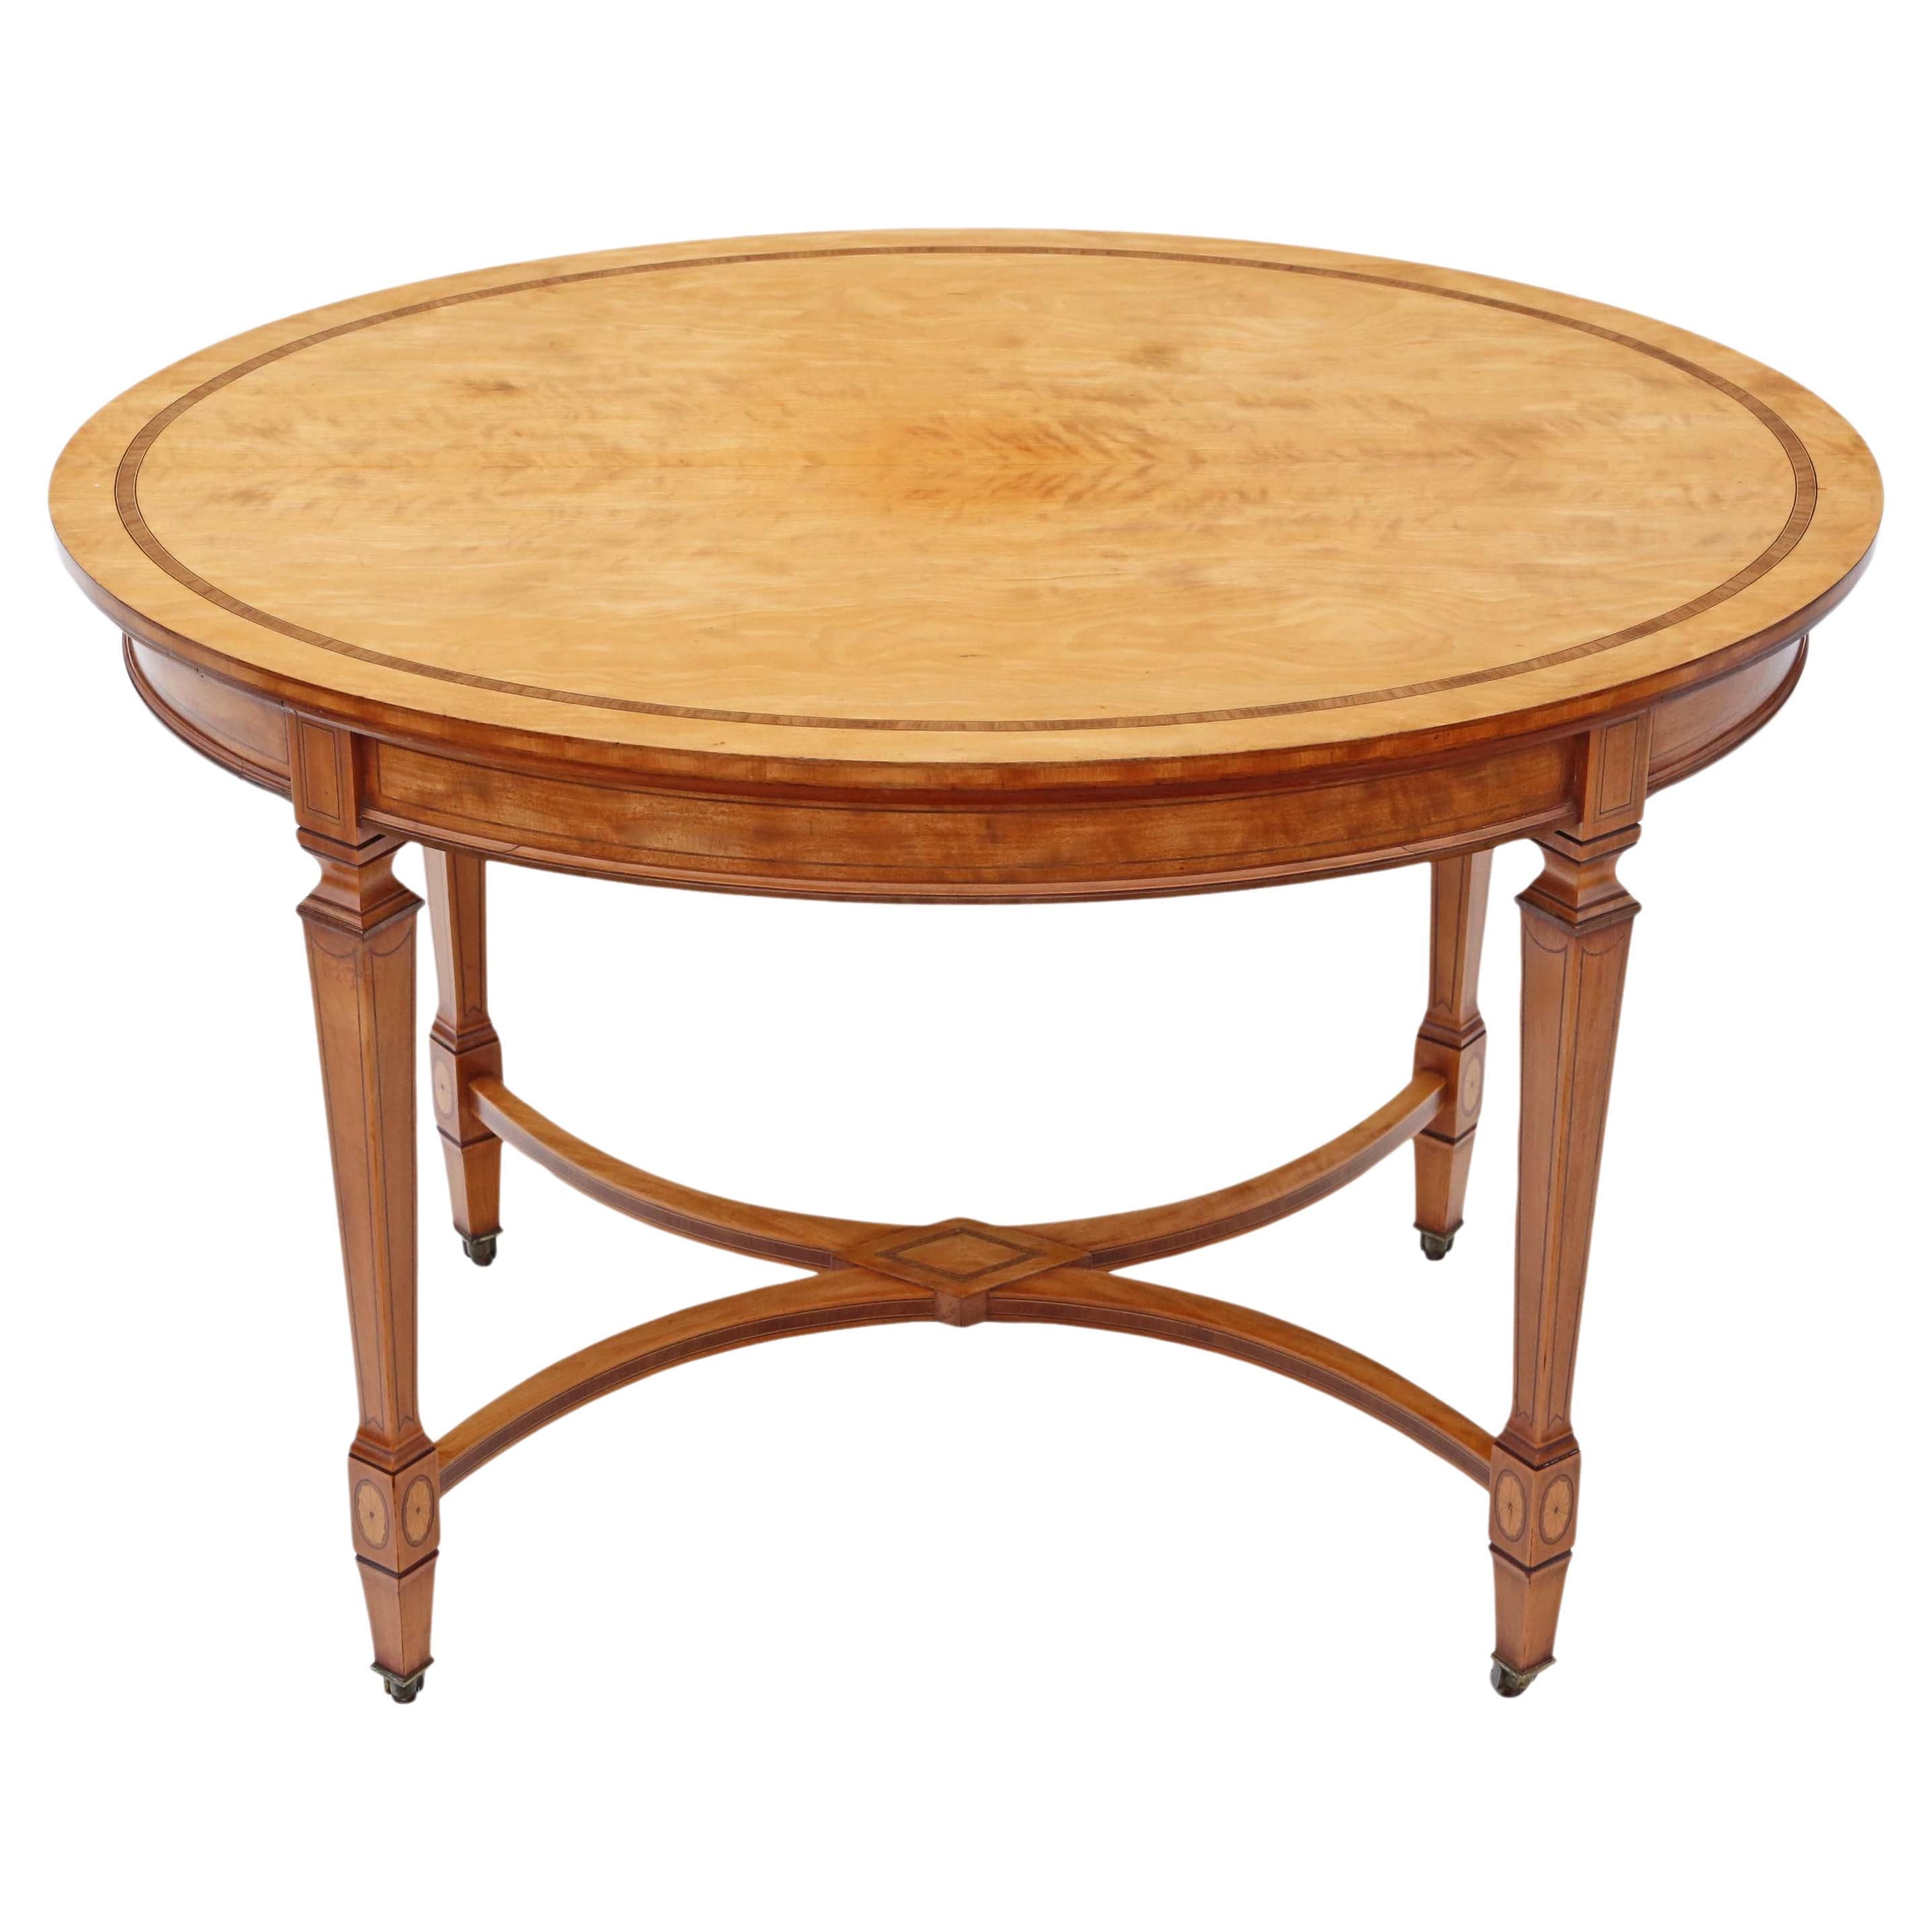 Fine Quality Victorian Inlaid Satinwood Centre Table from circa 1880-1900, Antiq